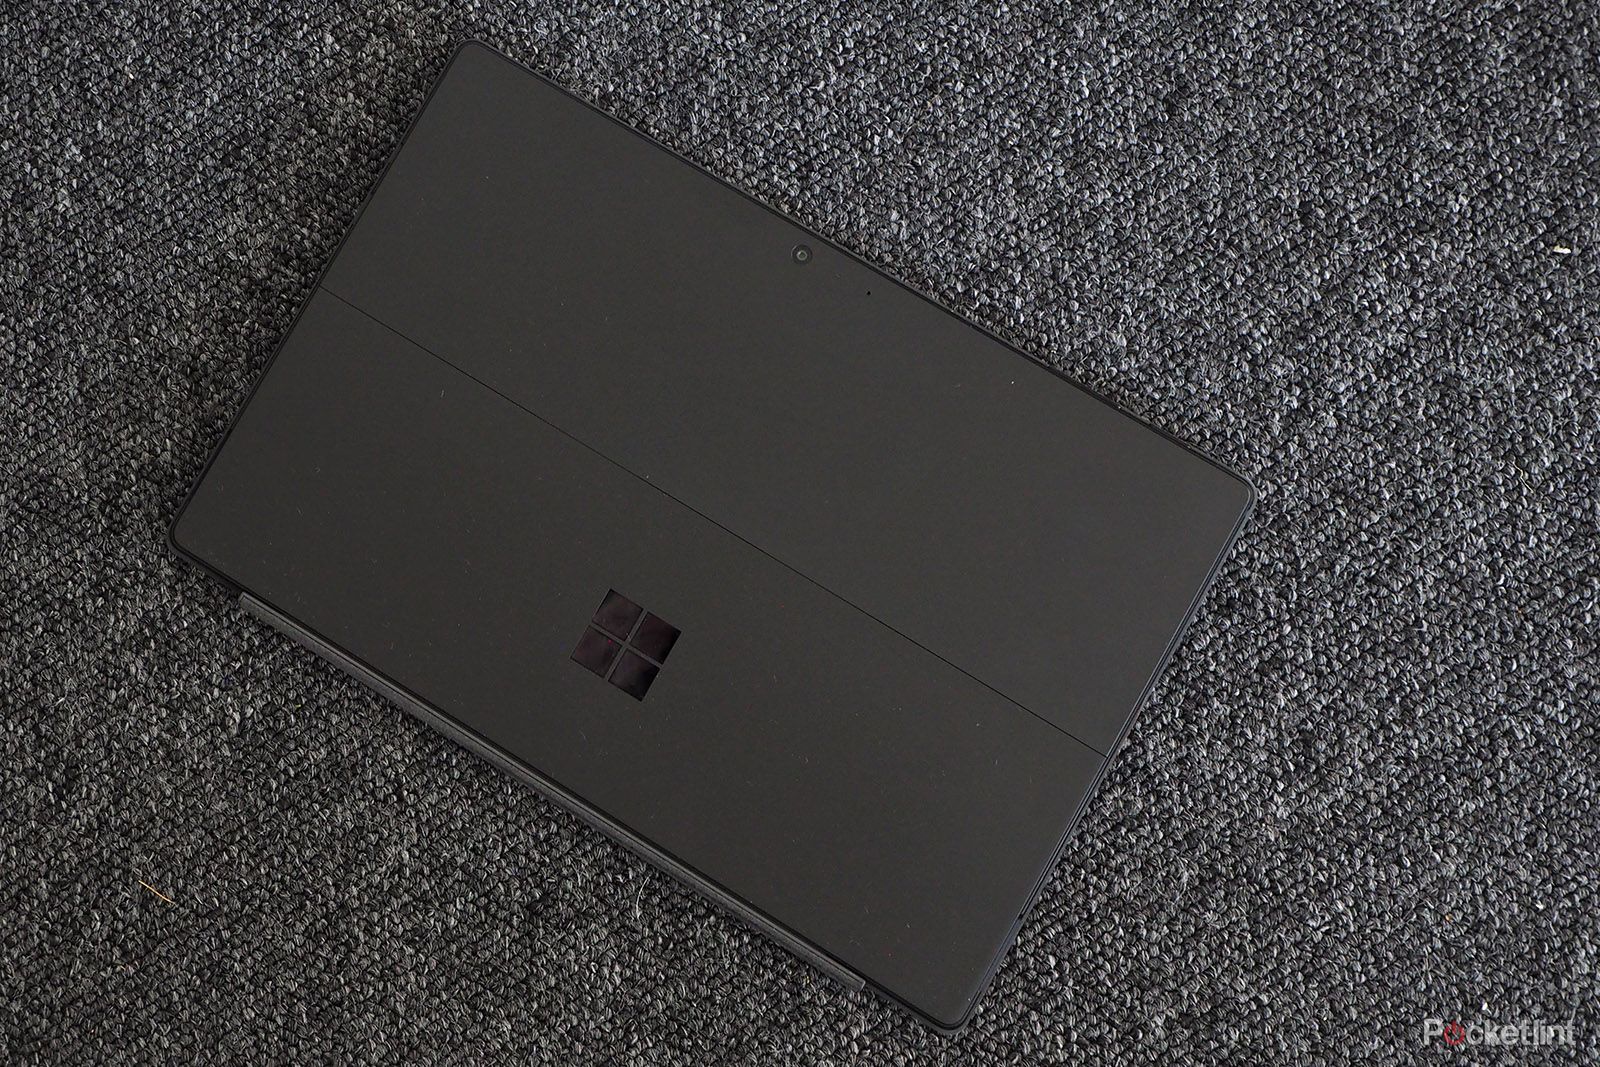 Microsoft Surface Pro 6 review image 3